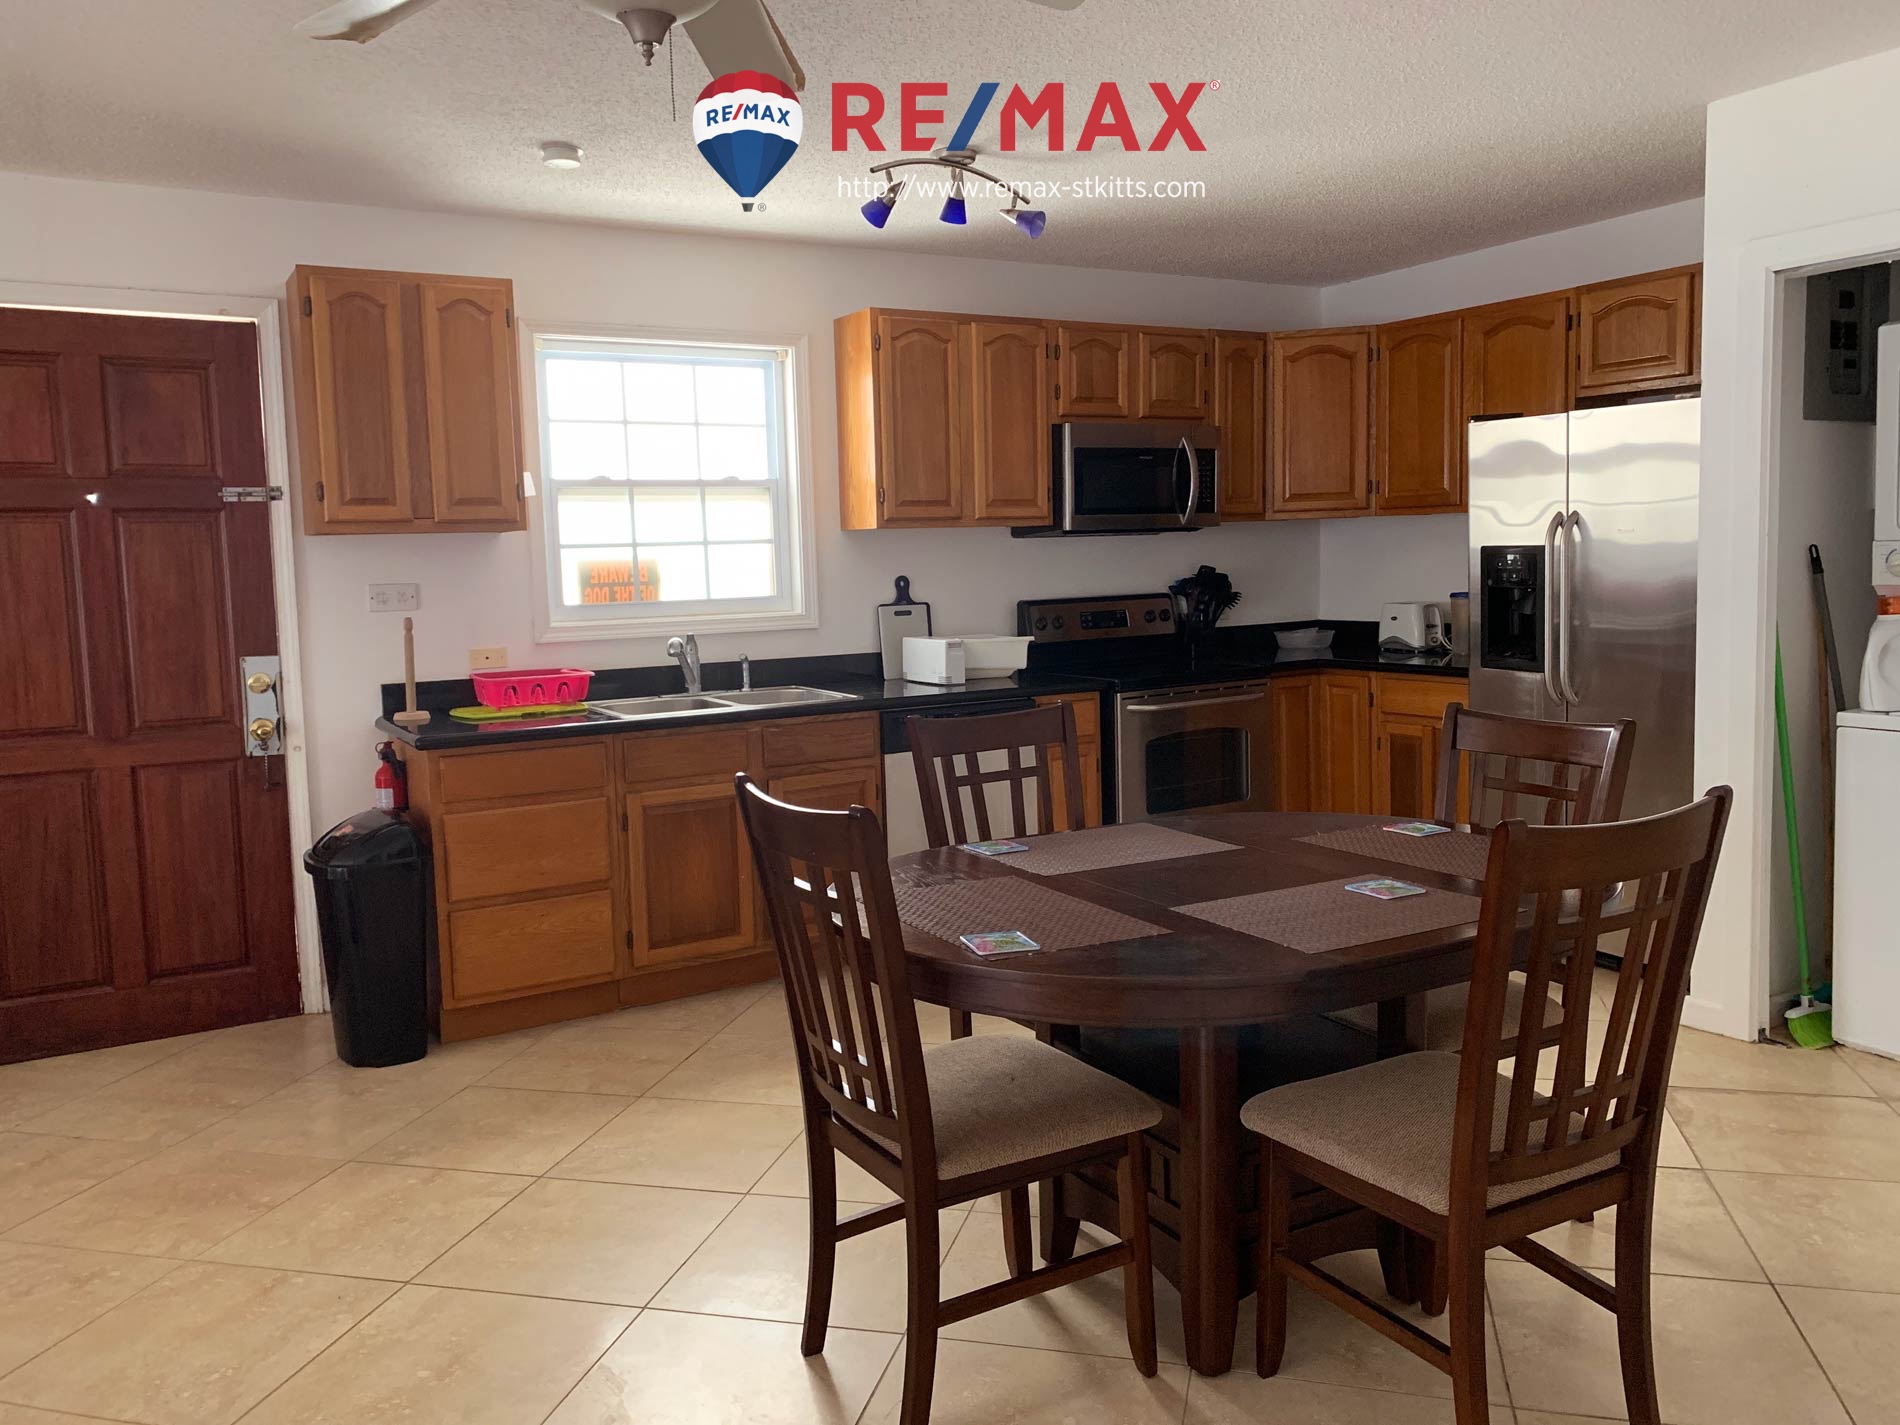 Living room and kitchen of 2 bedroom citizenship approved condo for sale st. kitts